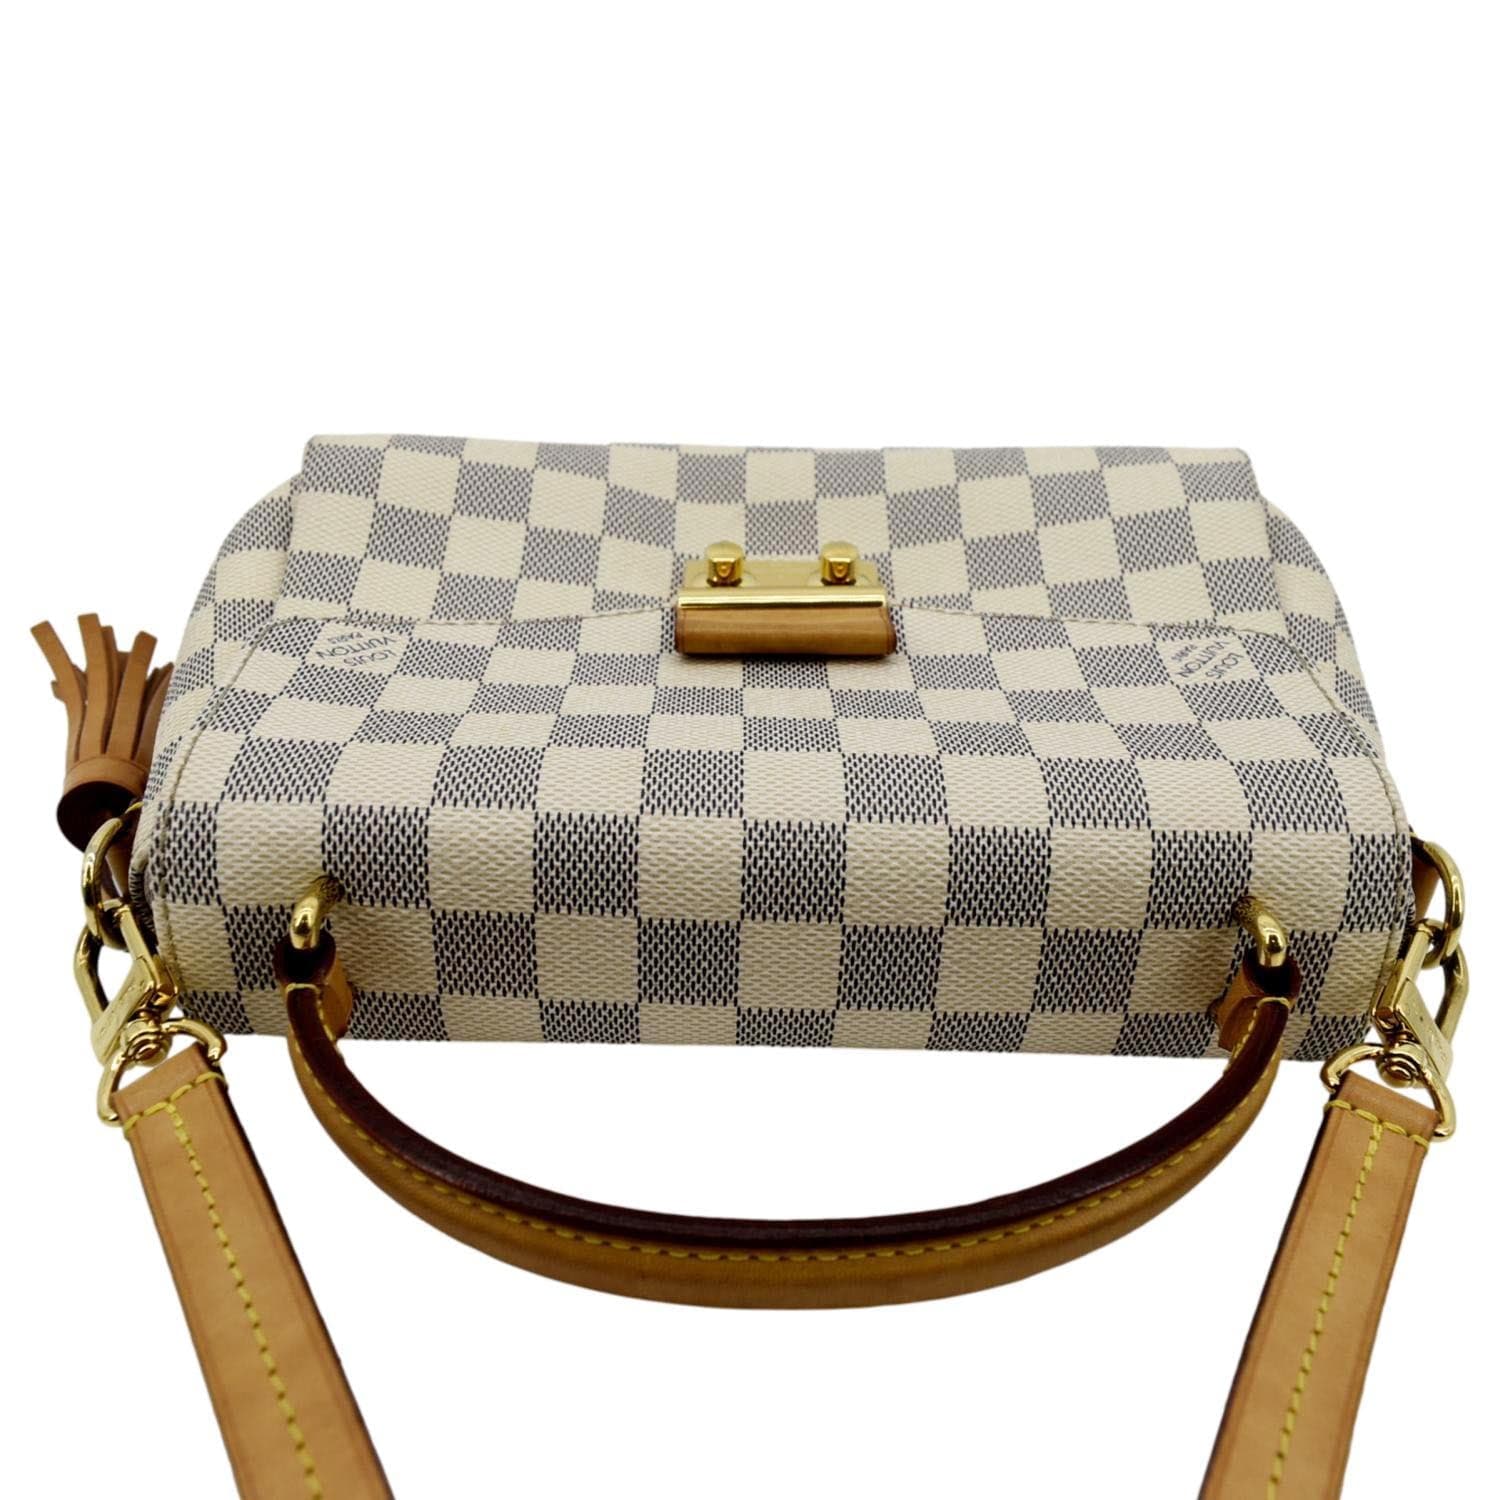 Vintage Louis Vuitton Handbags and Purses - 4,512 For Sale at 1stDibs